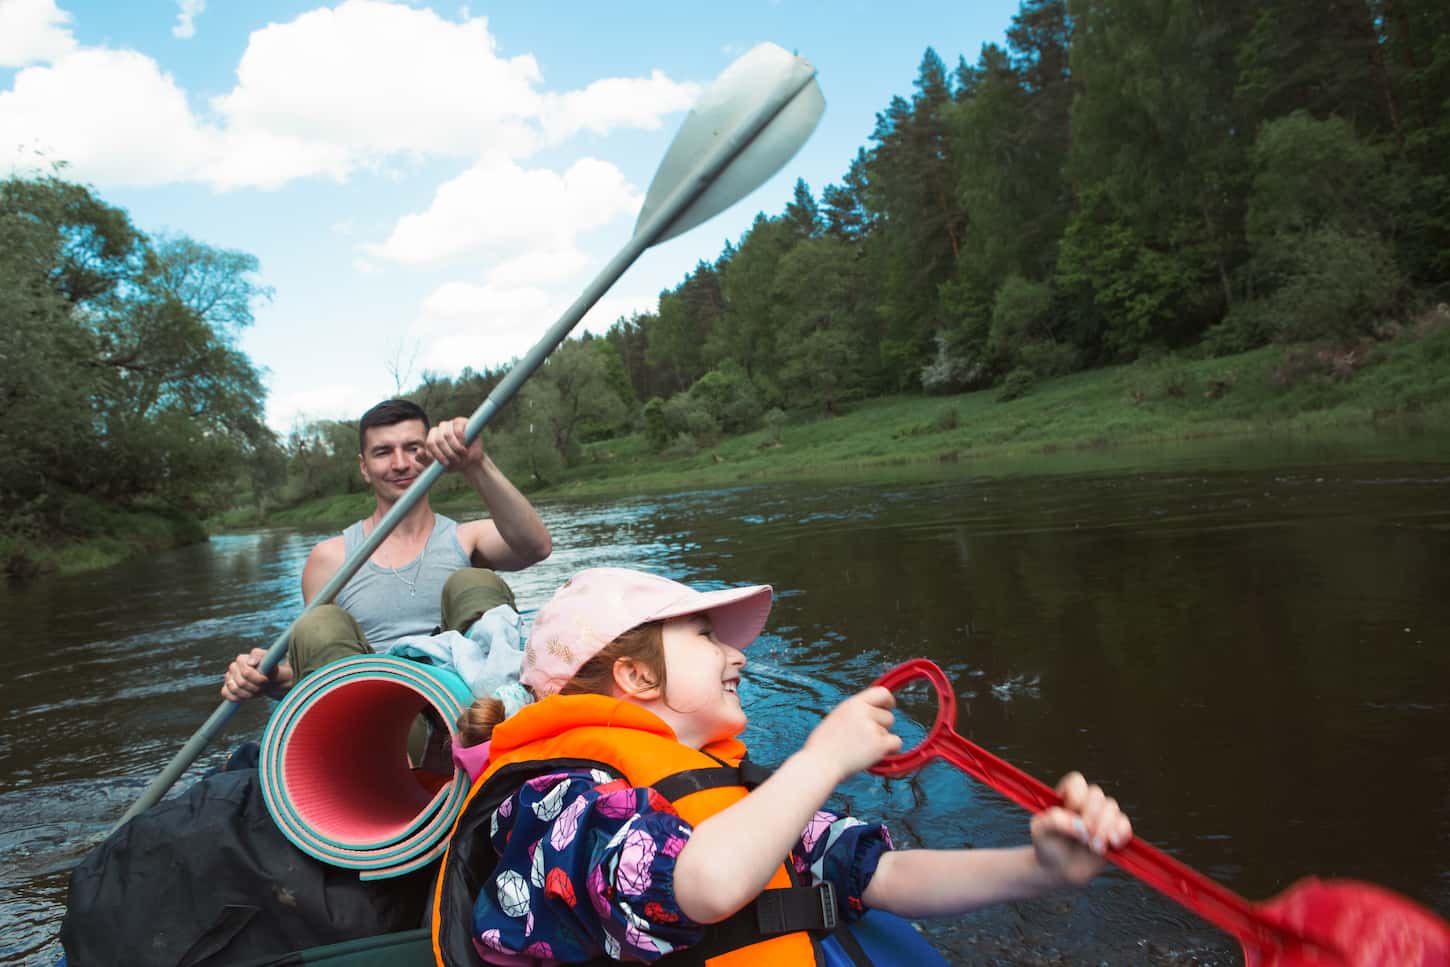 Kayaking as A Family: Here’s Why It’s A Great Idea